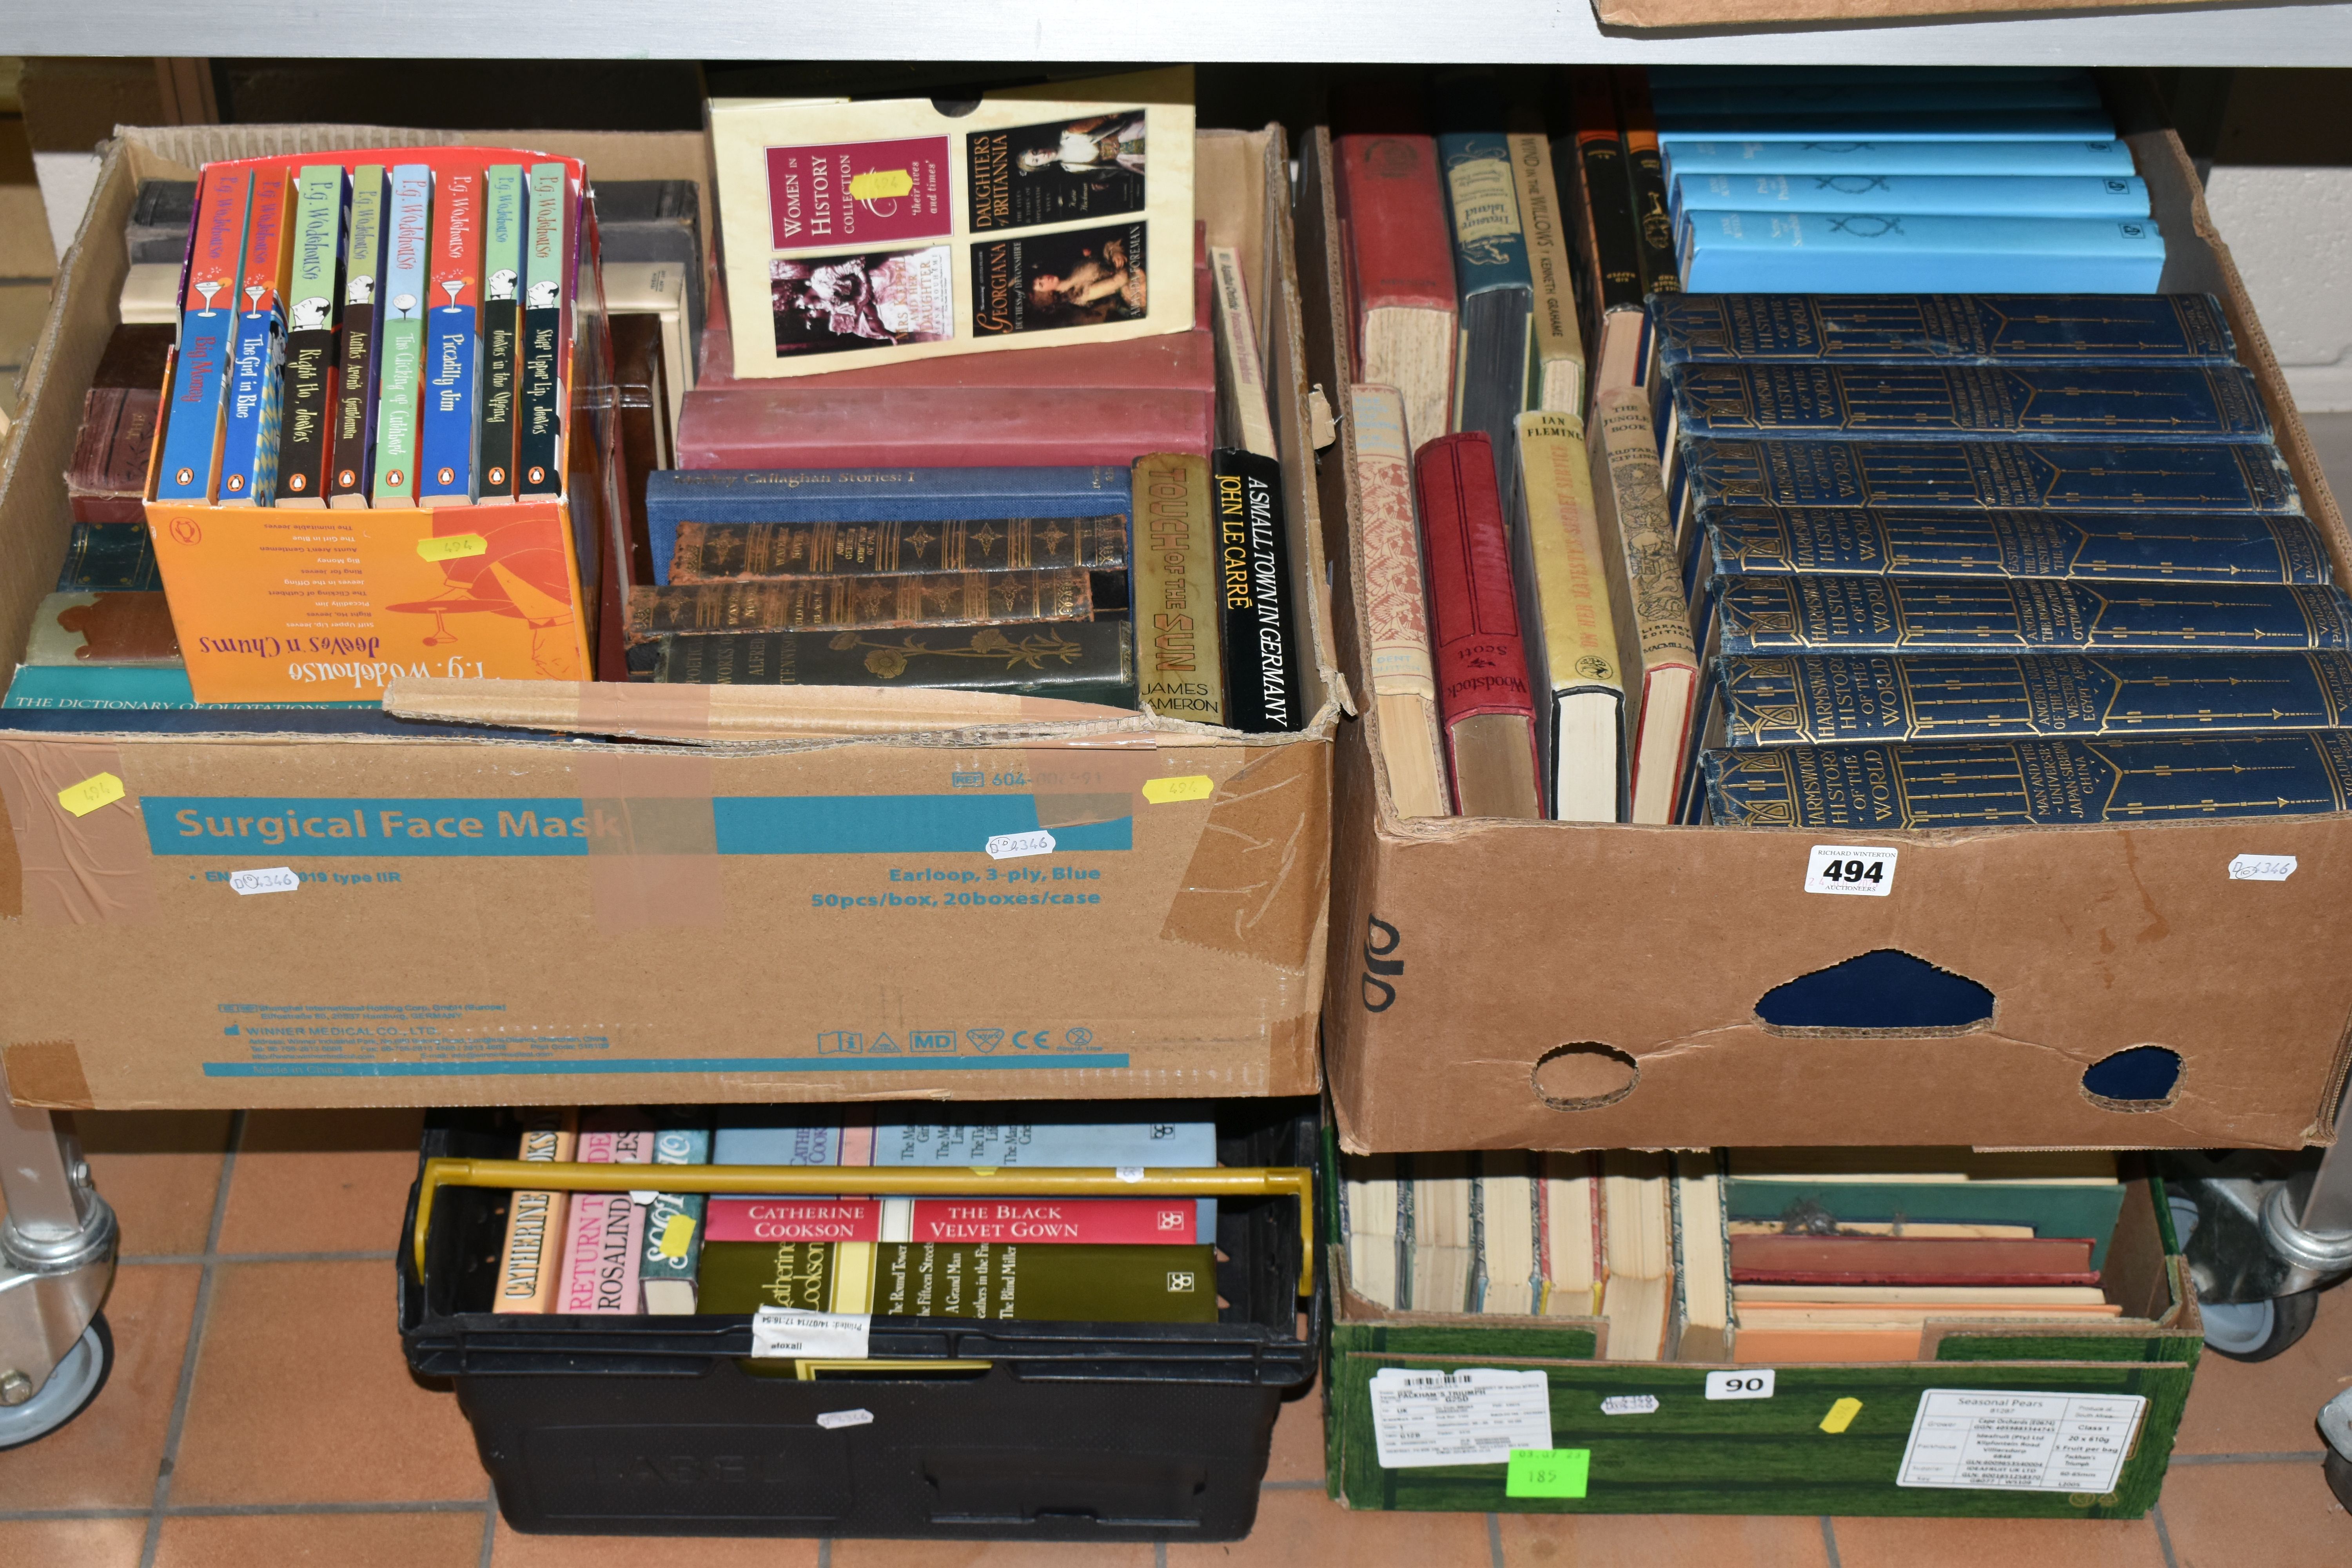 FOUR BOXES OF BOOKS containing approximately 120 miscellaneous titles in hardback and paperback